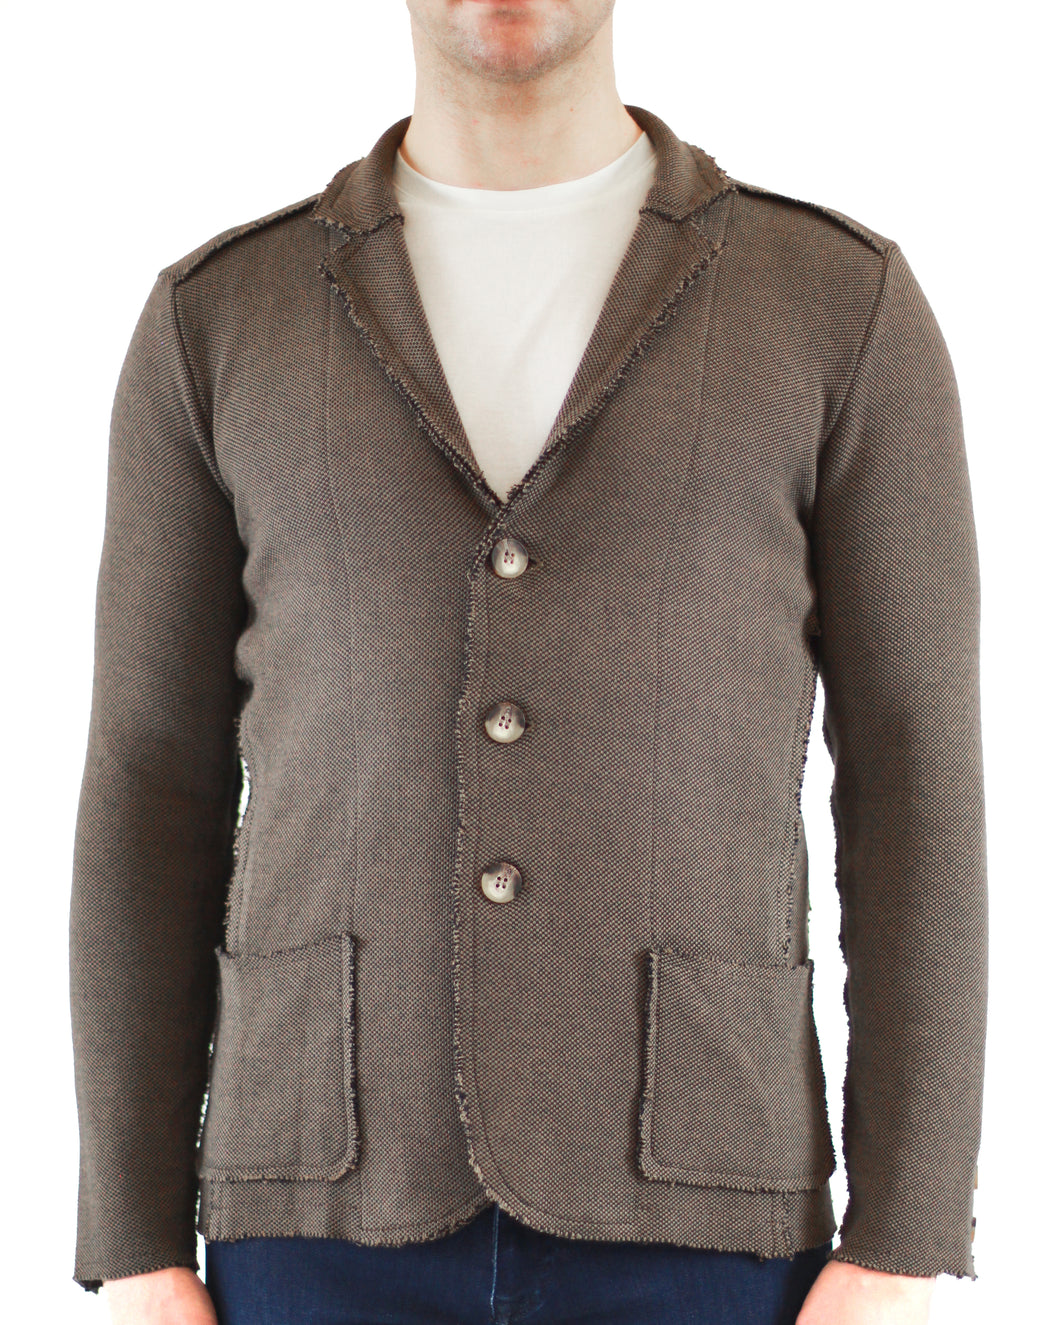 Taupe and Black Deconstructed Knit Sportcoat